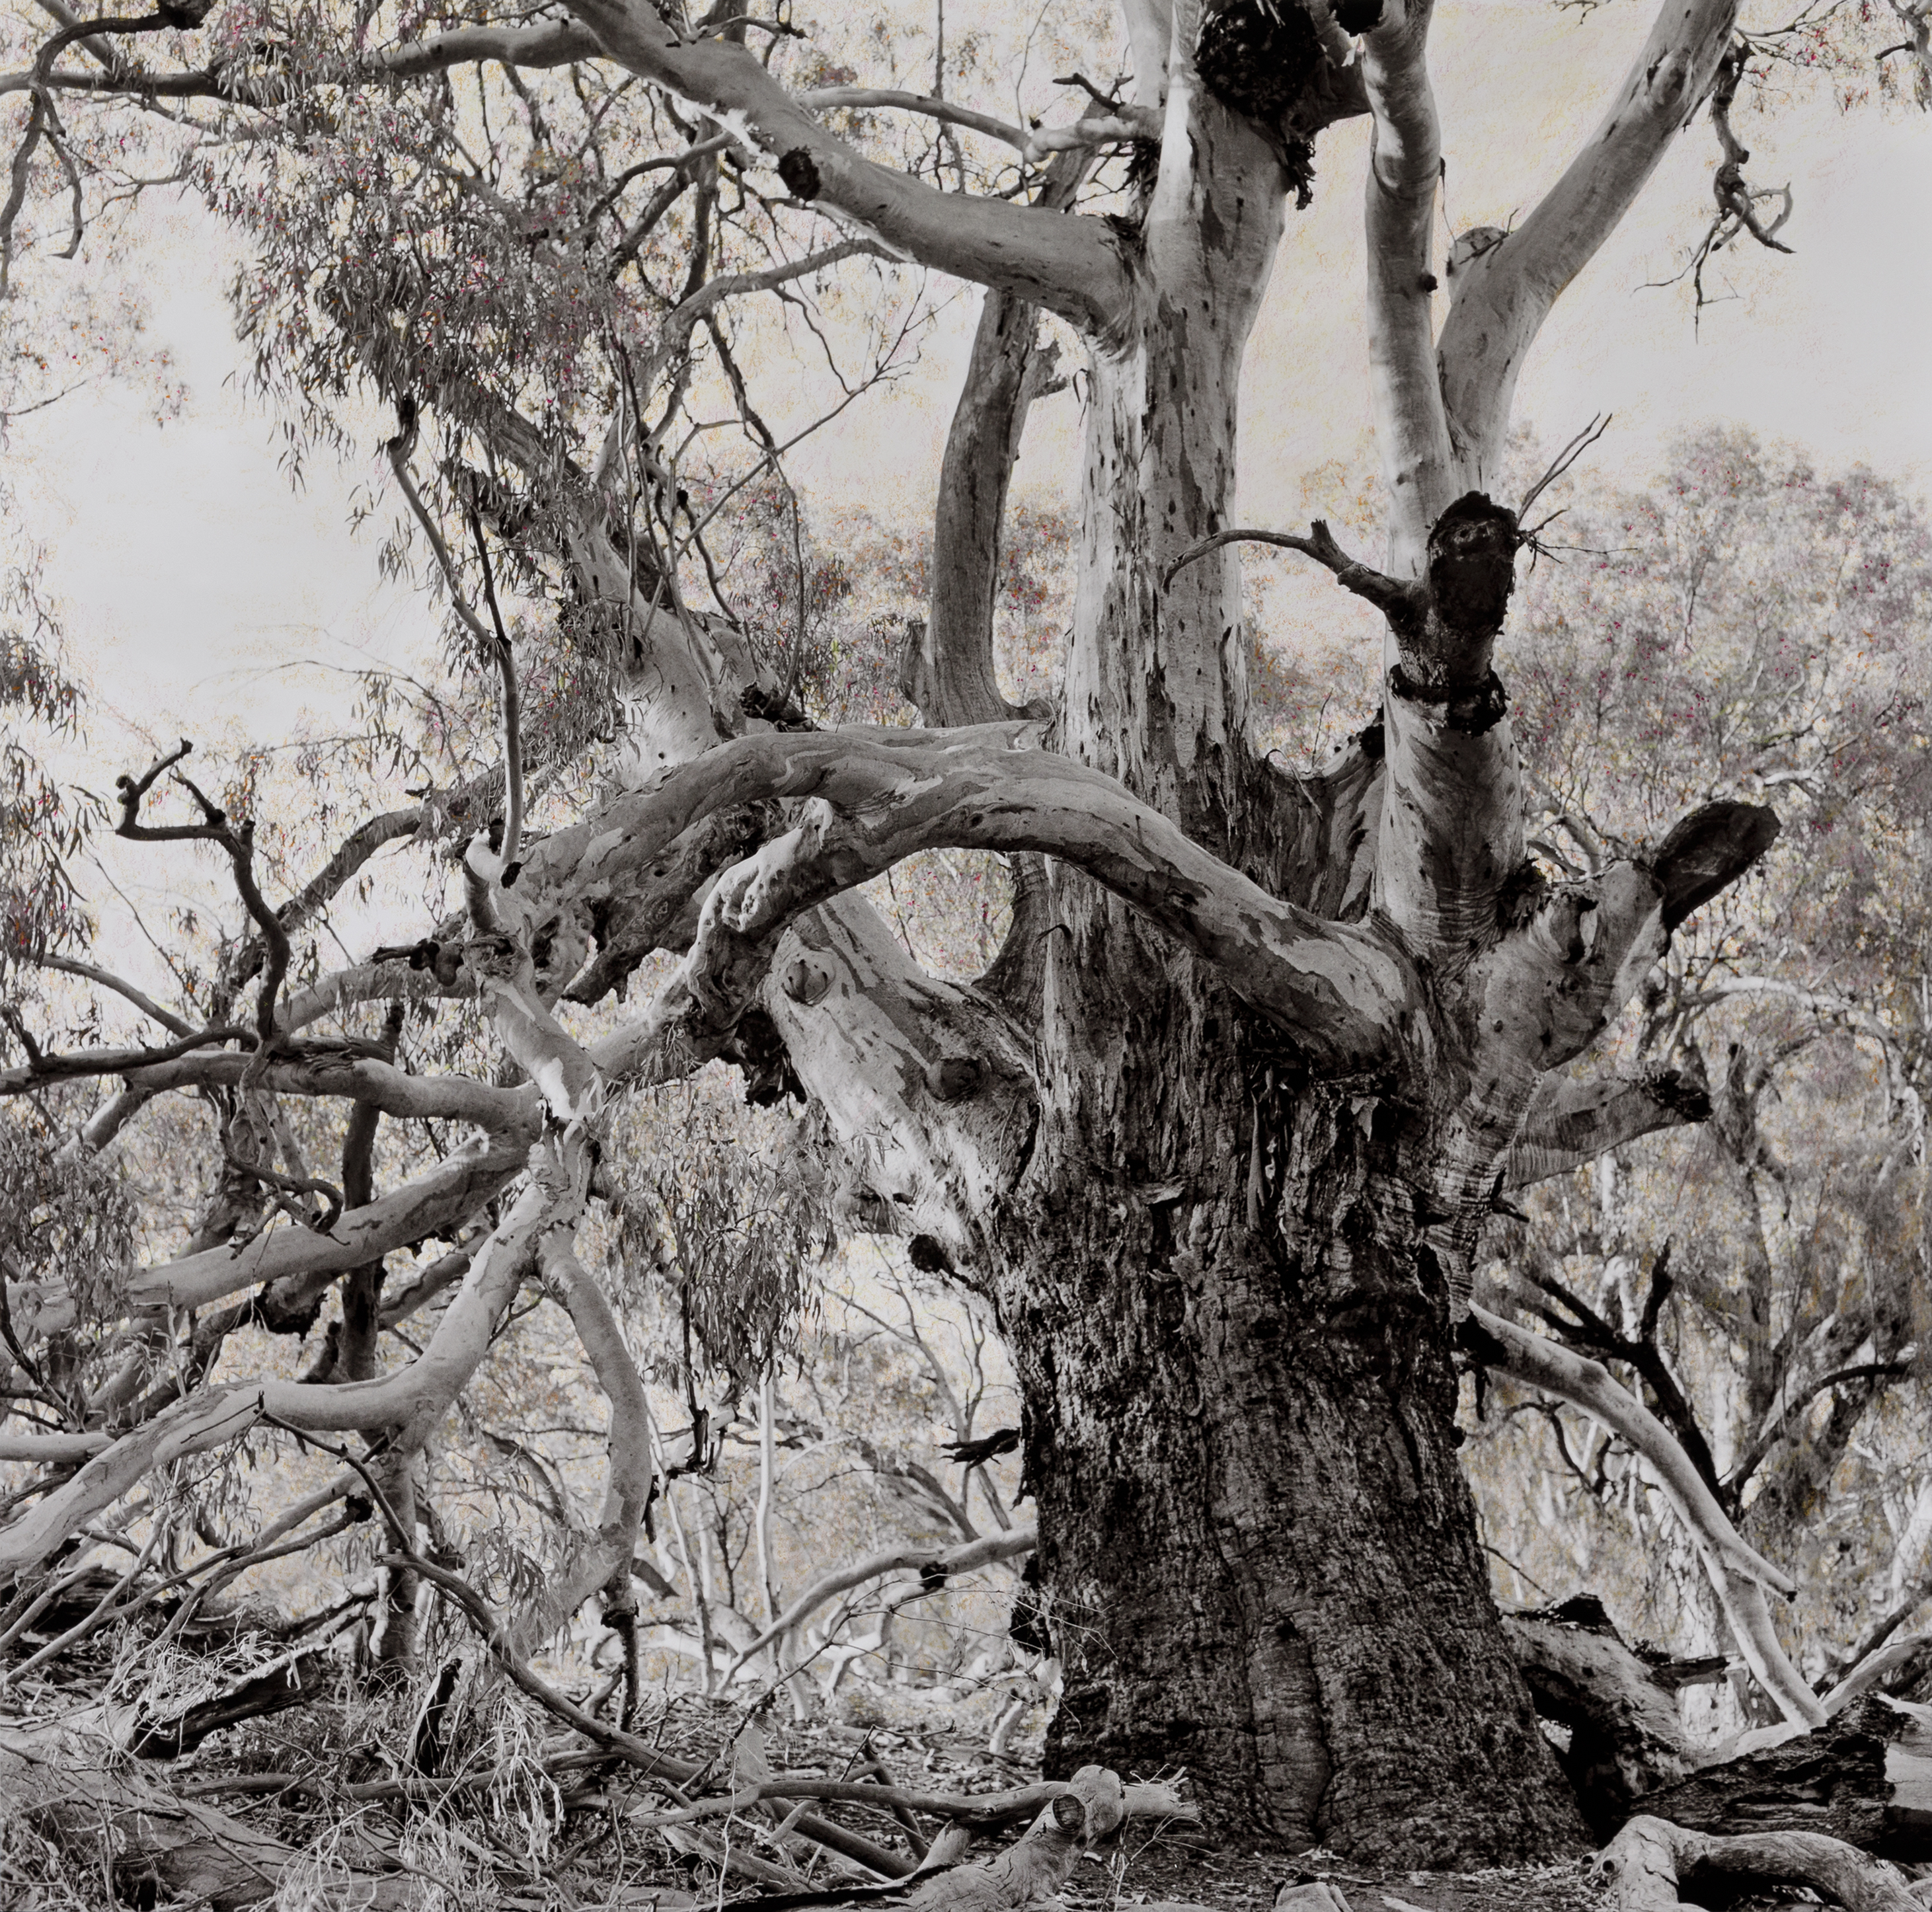 Black-and-white artwork of Great-grandmother Barka, an old tree.